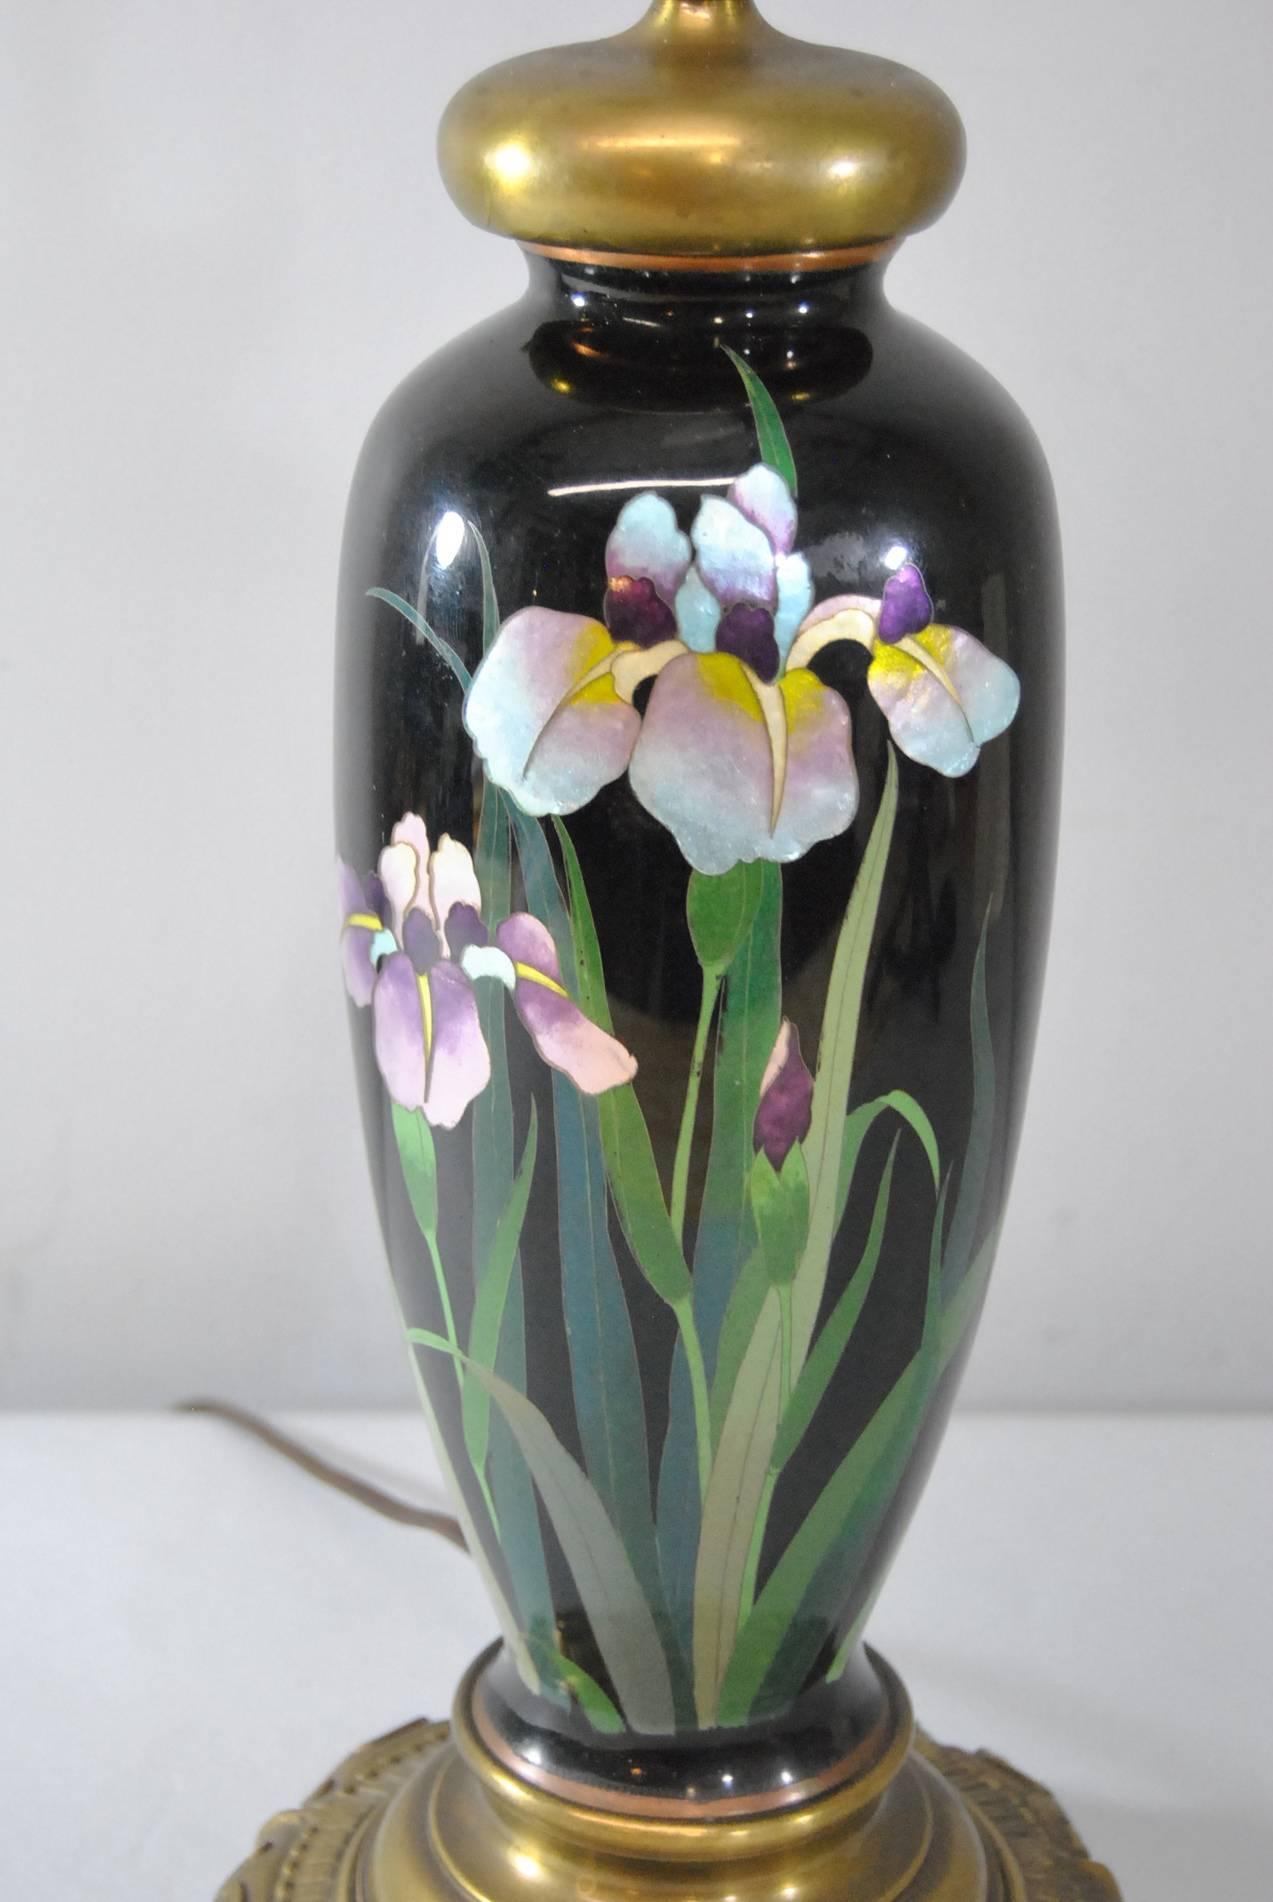 A beautiful Japanese Meiji cloisonné table lamp. It features an enamel finish with a black field and purple, blue and pink iridescent iris flowers. The shade shown in the photo is not included. 26 3/4